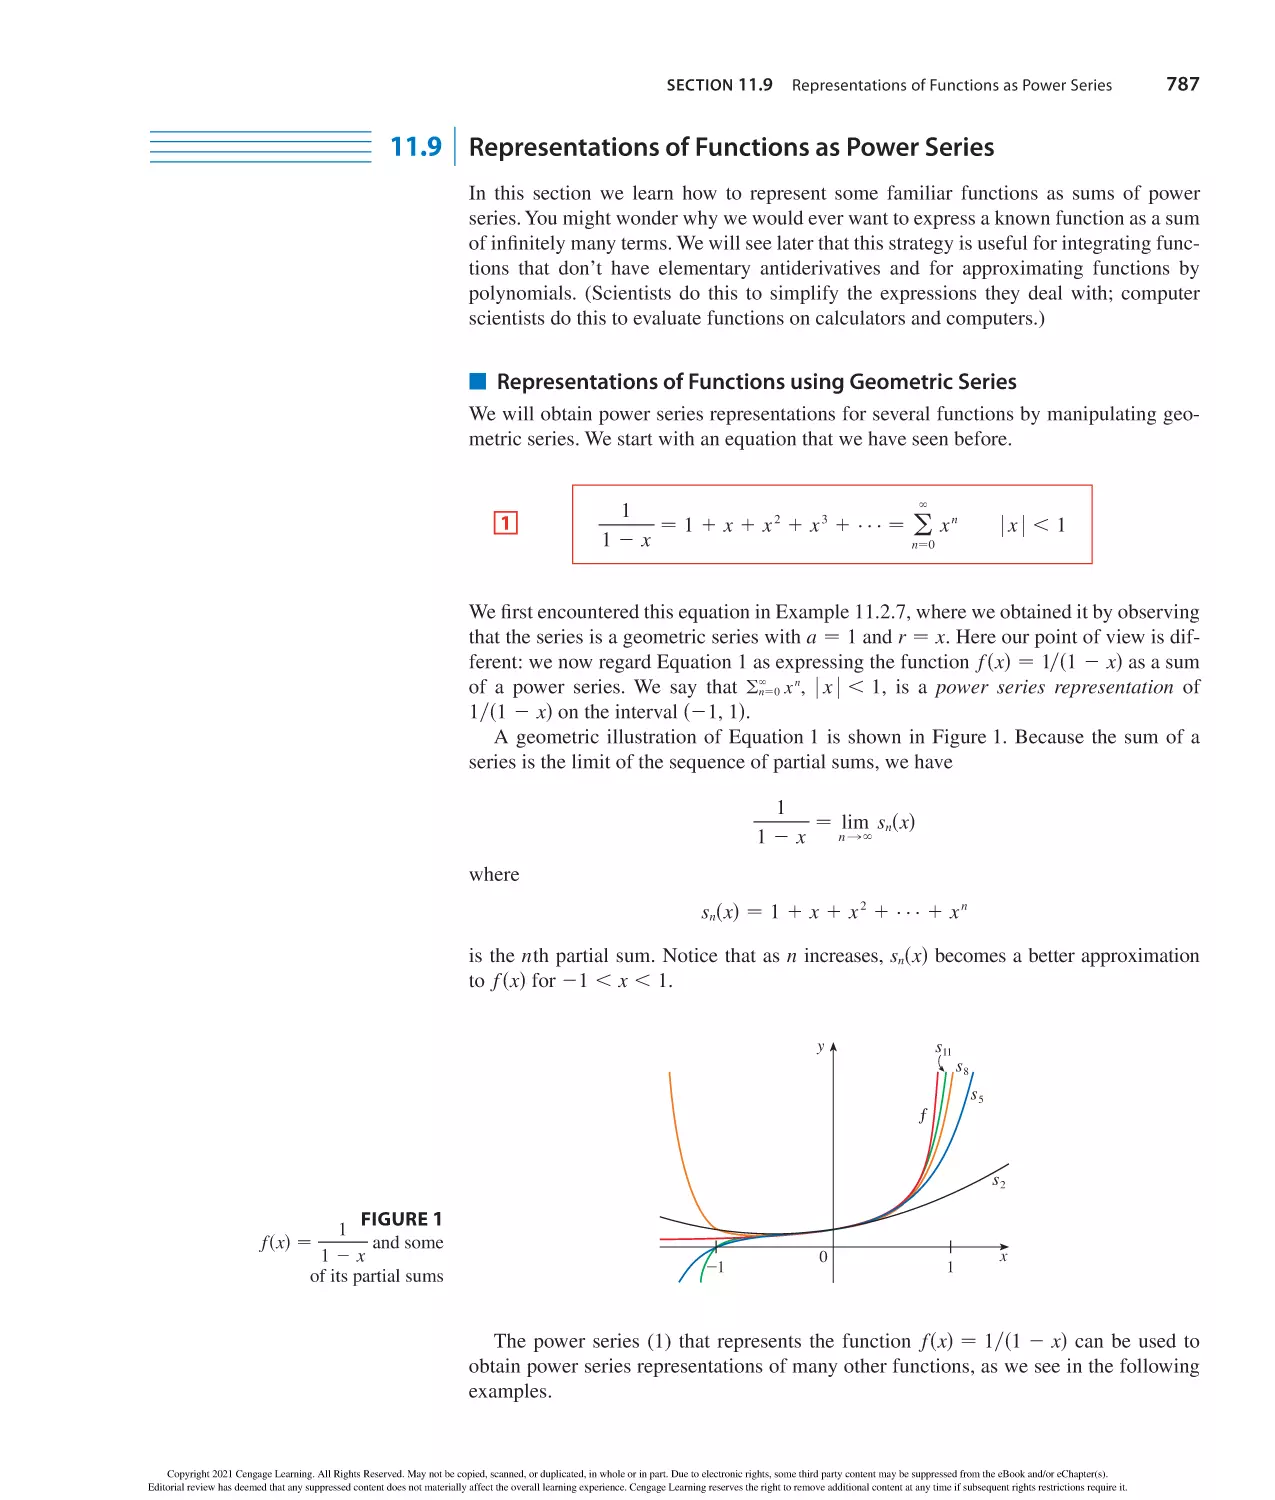 11.9 Representations of Functions as Power Series